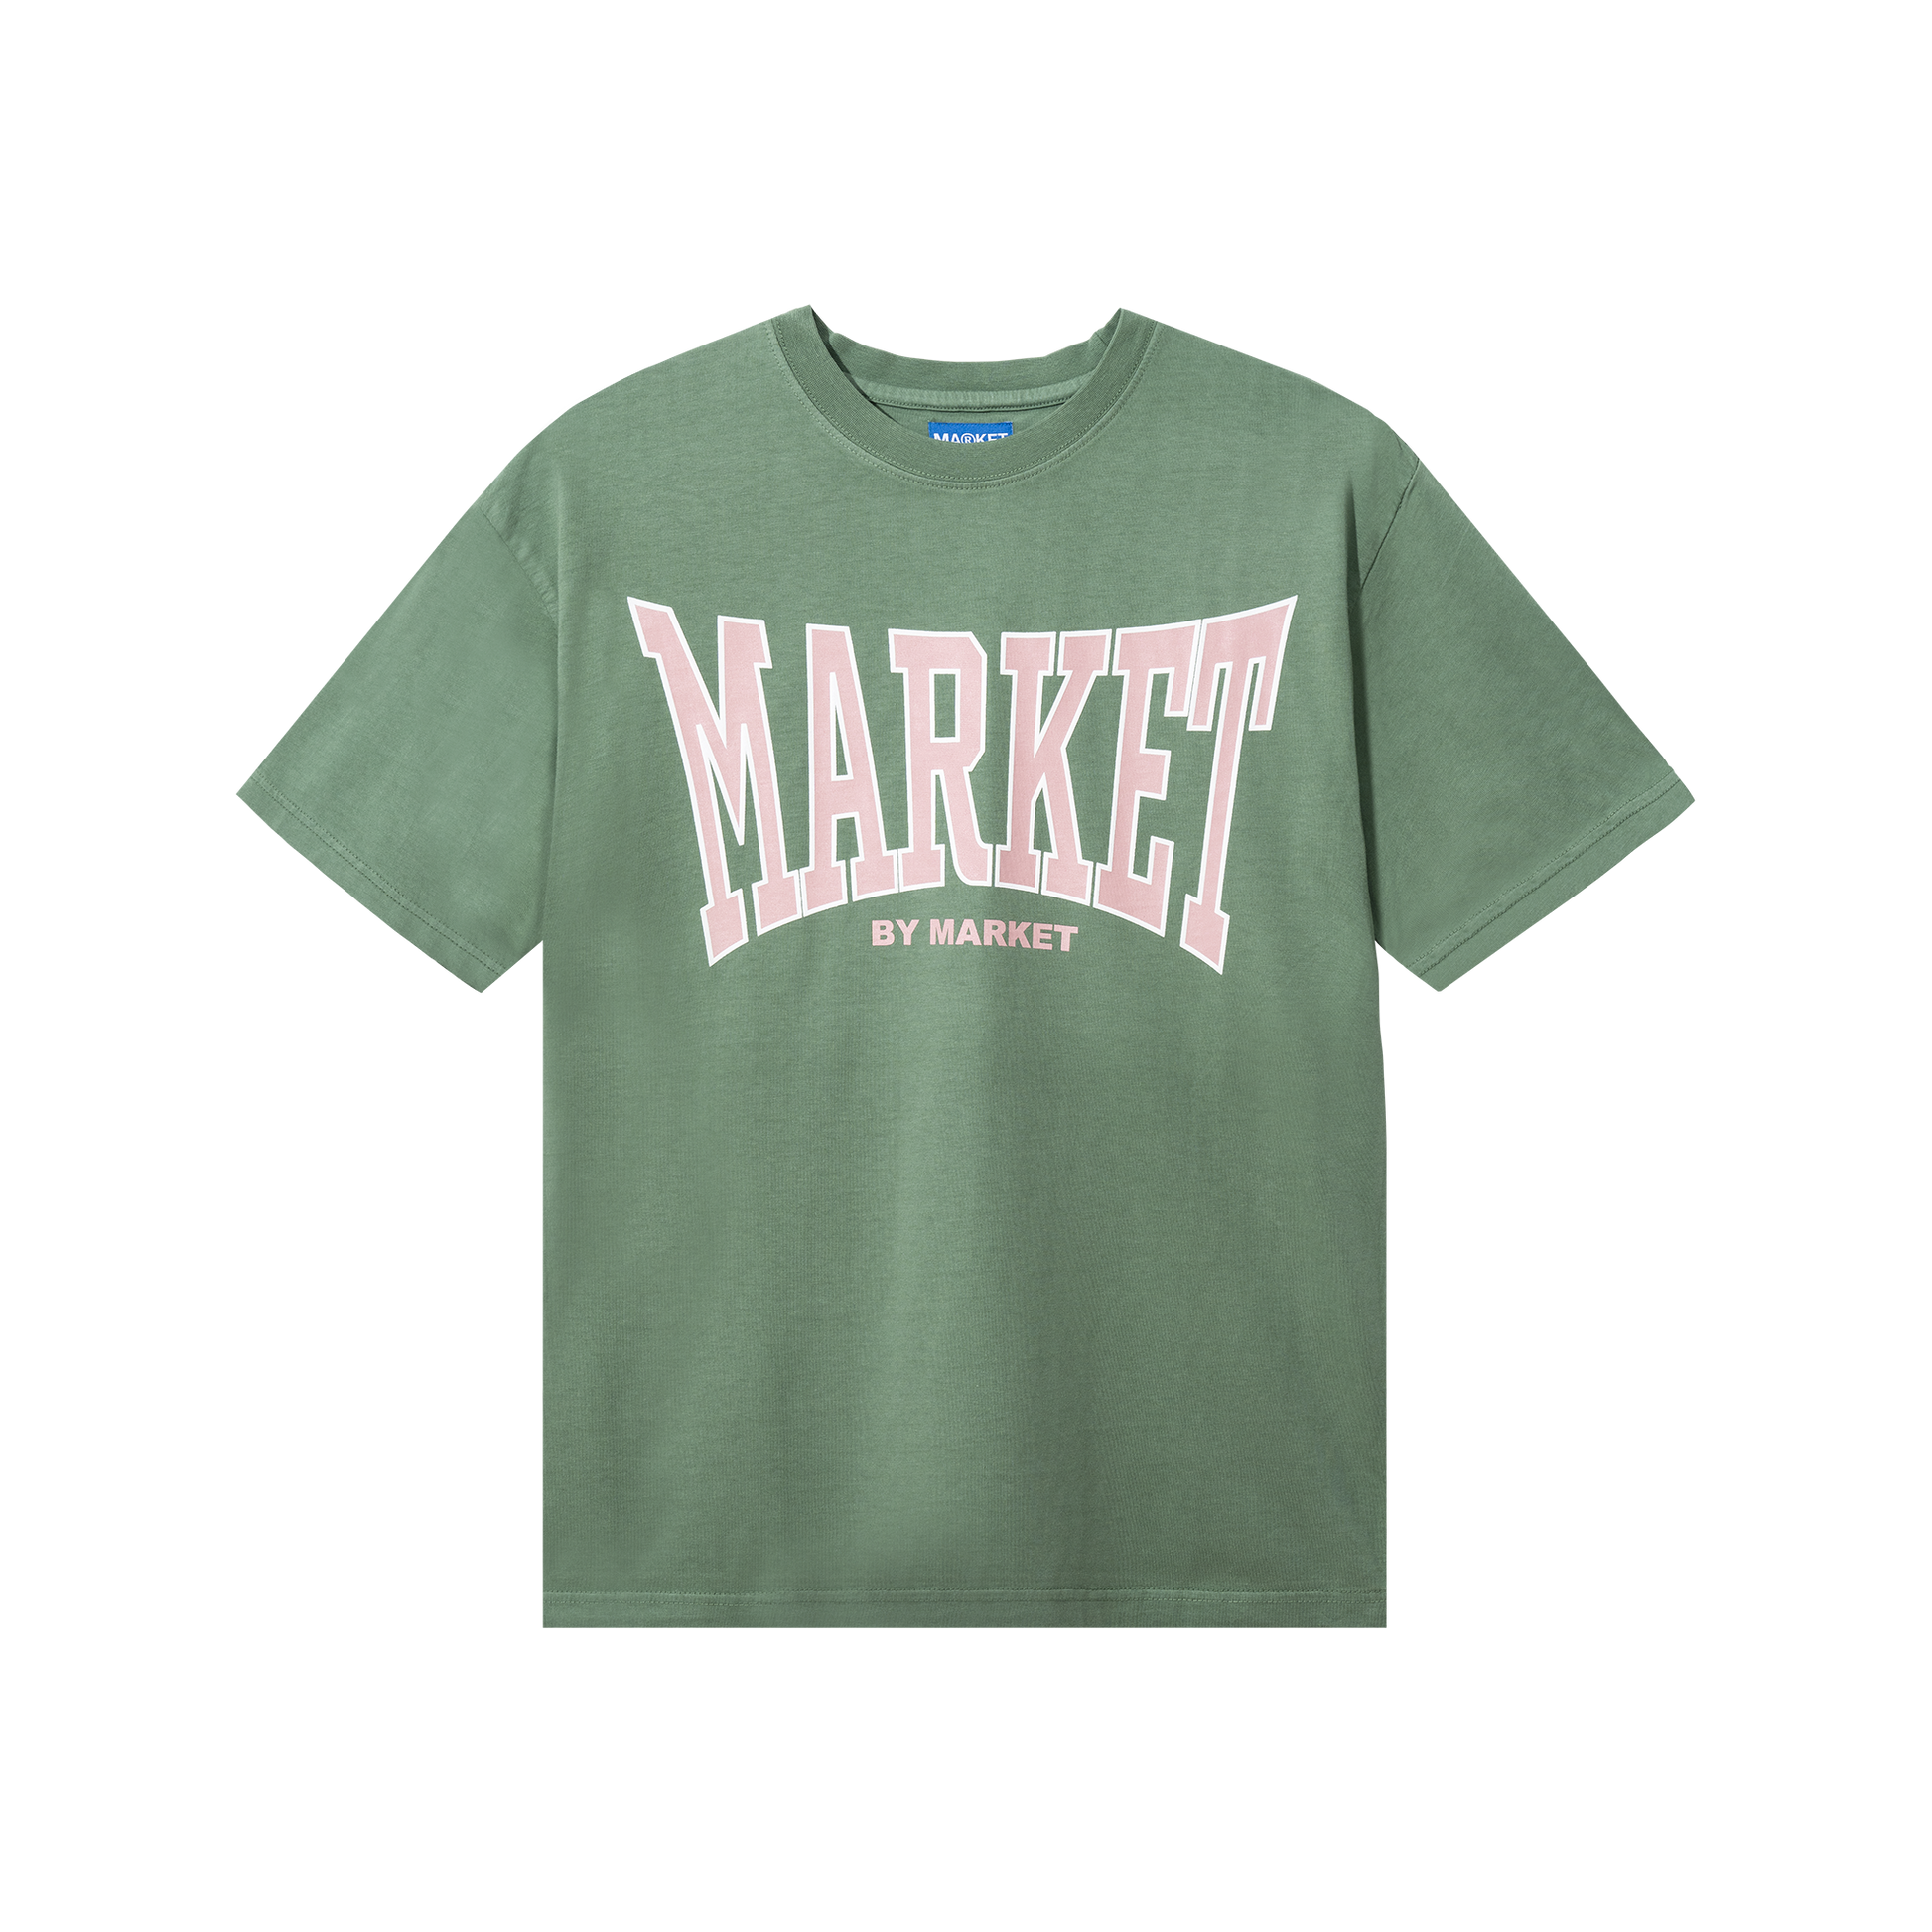 MARKET clothing brand PERSISTENT LOGO T-SHIRT. Find more graphic tees, hats, hoodies and more at MarketStudios.com. Formally Chinatown Market.